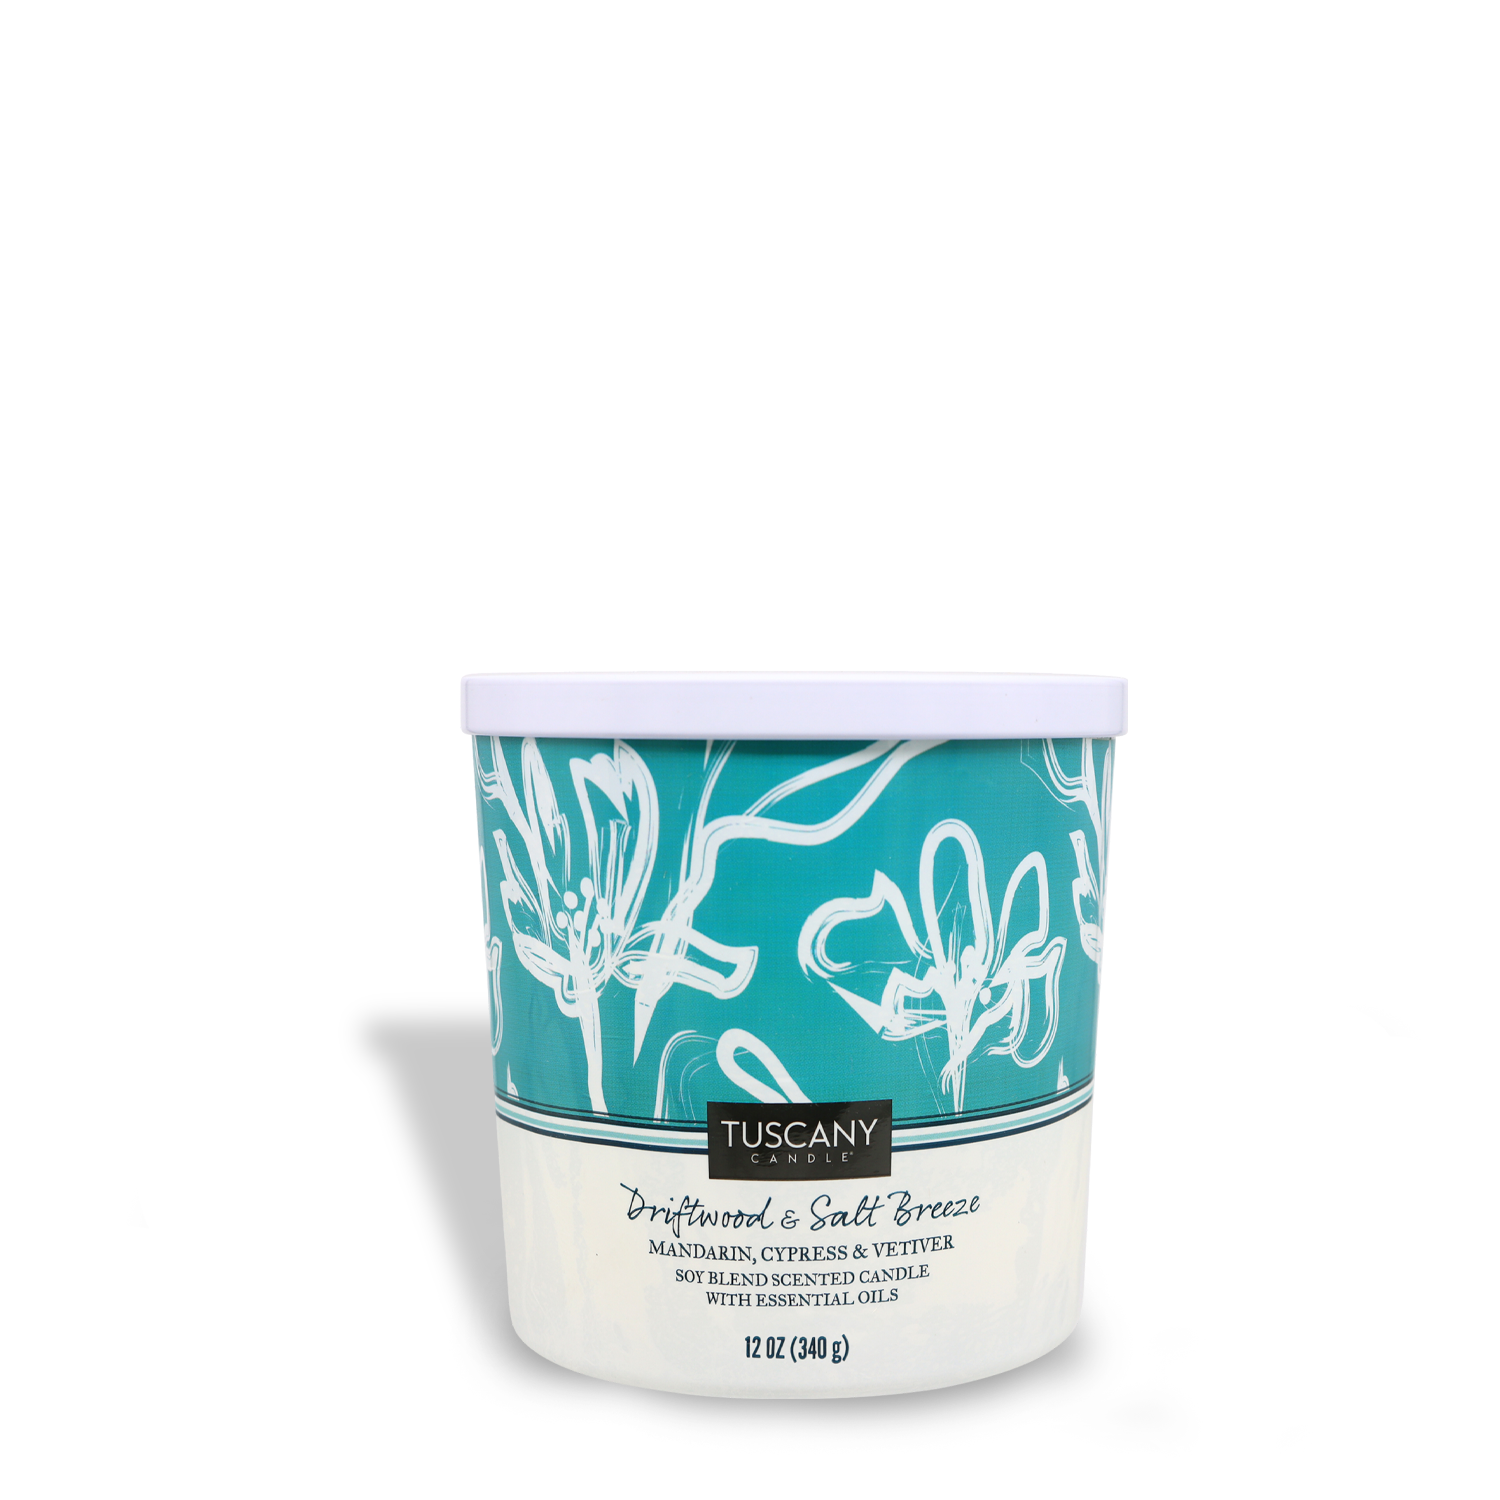 A container of Tuscany Candle® SEASONAL Driftwood & Salt Breeze (12 oz) scented candle on a white background.